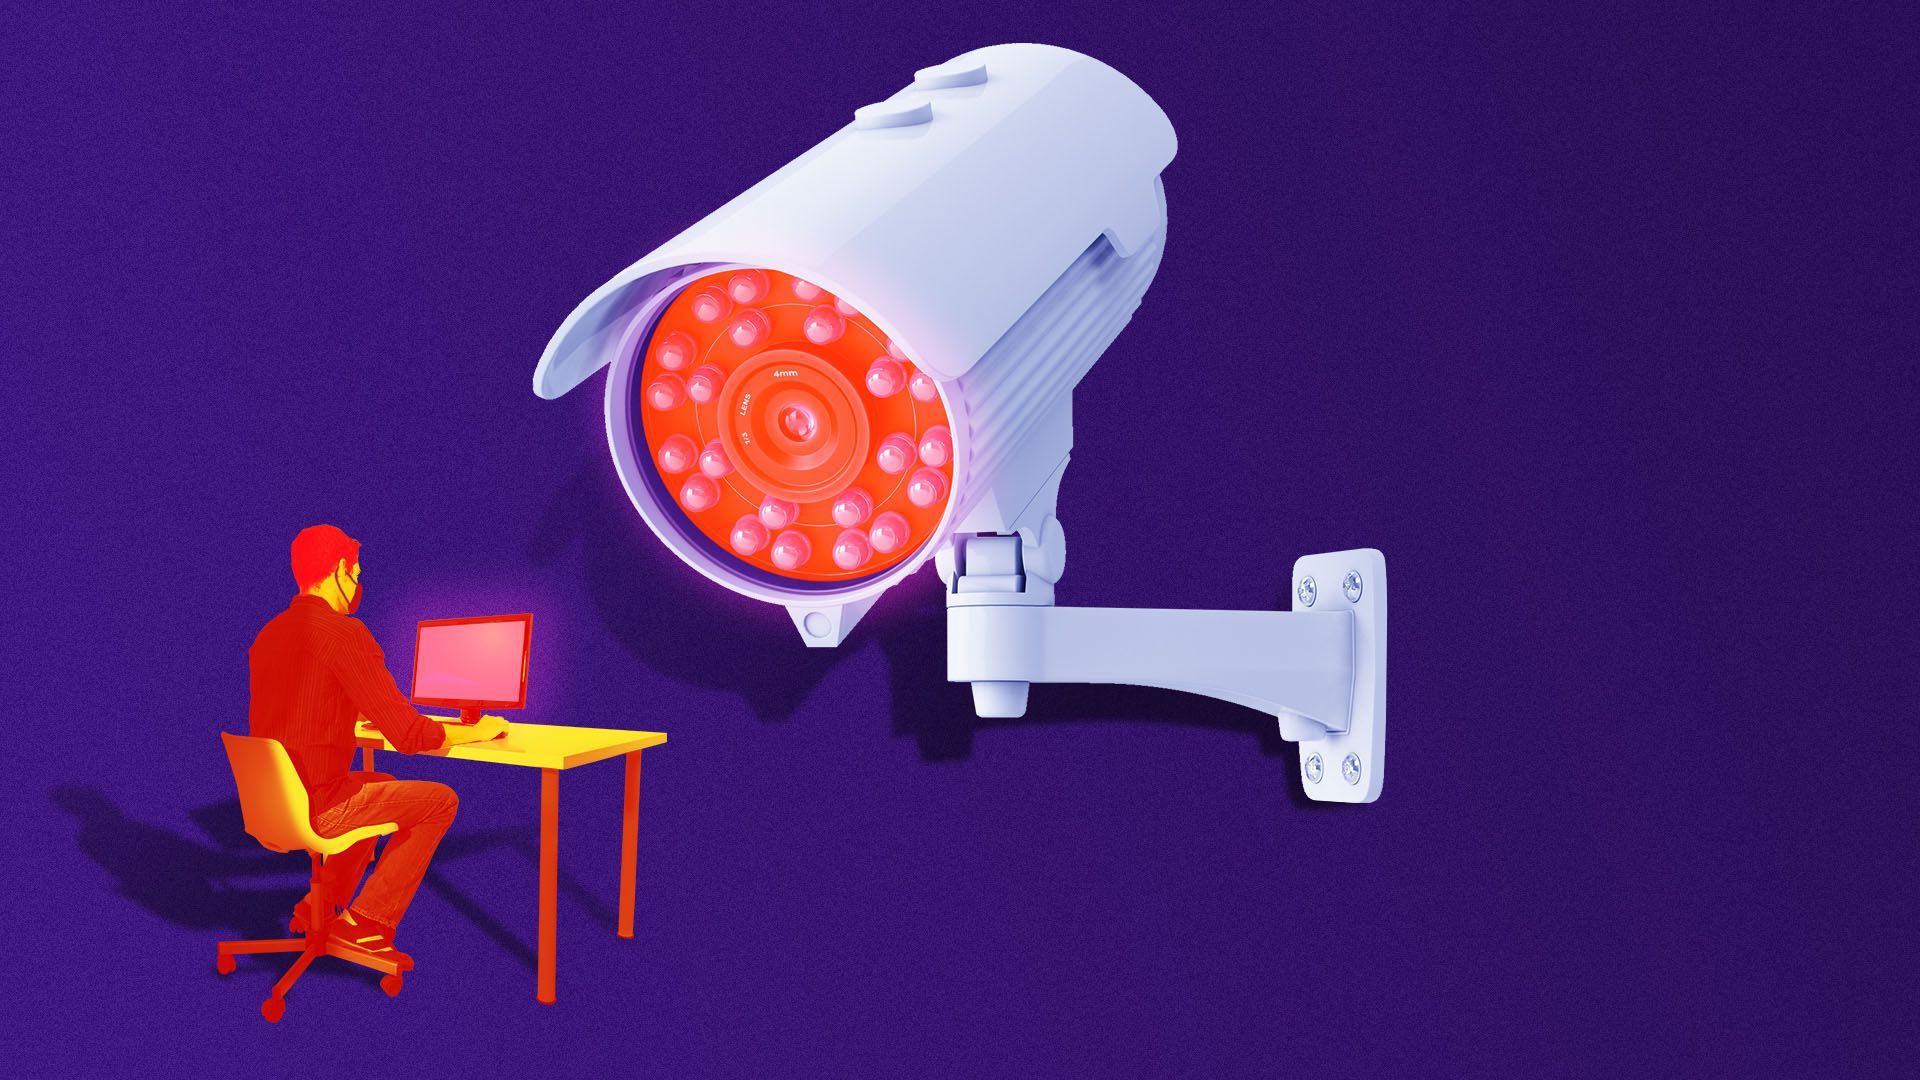 Illustration of a giant surveillance camera over a worker at a desk.